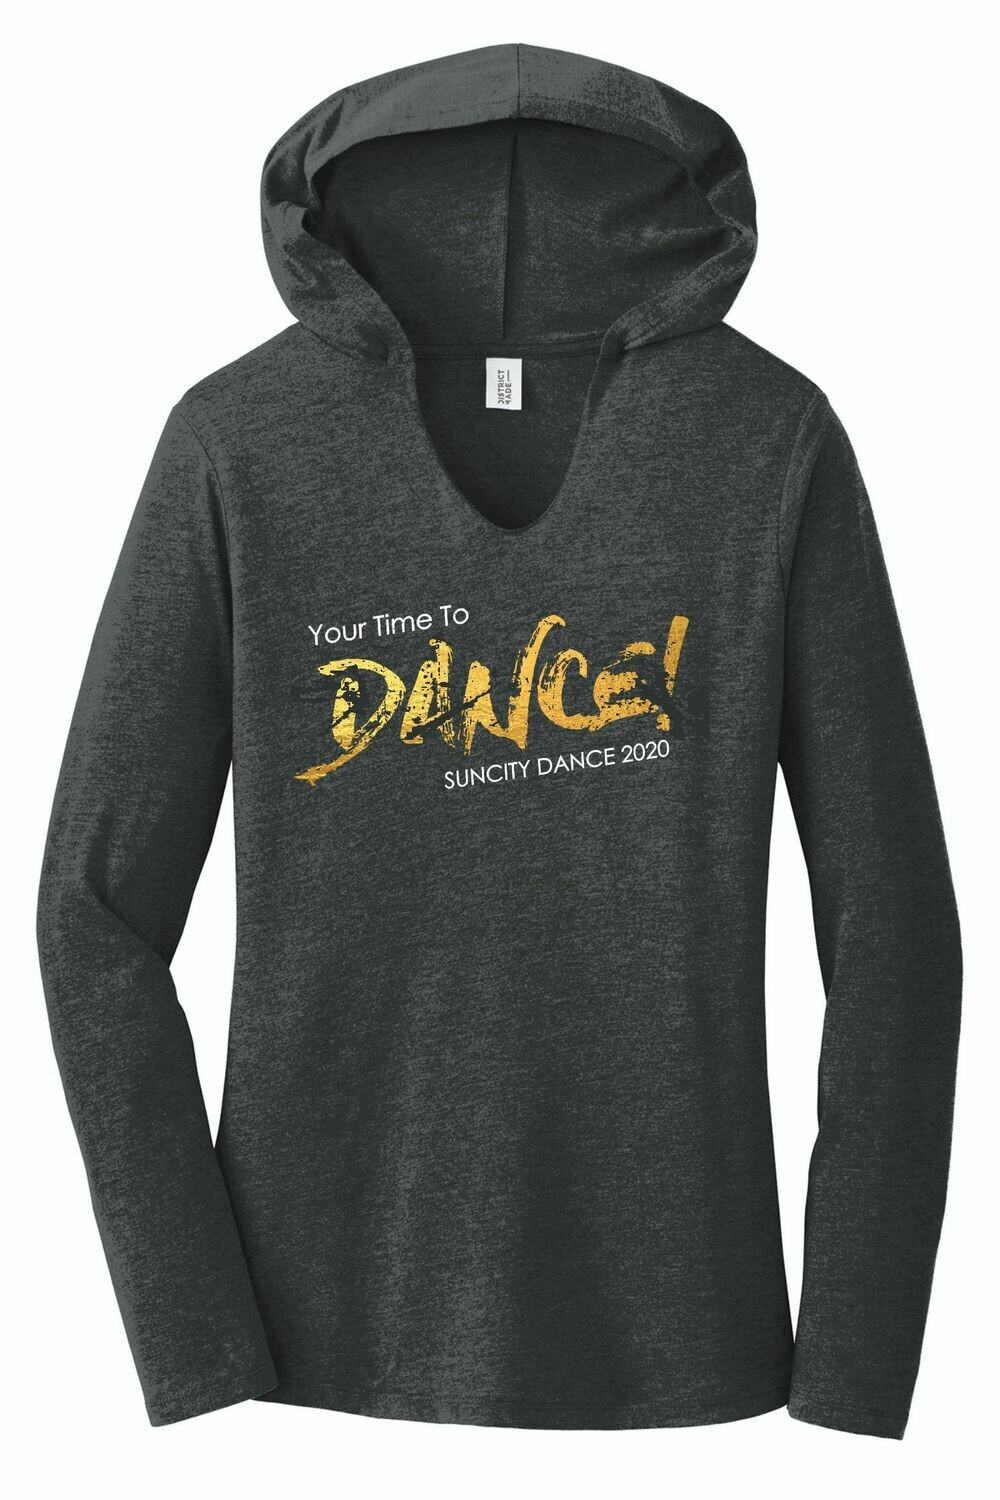 Your Time To Dance! Light Hoodie